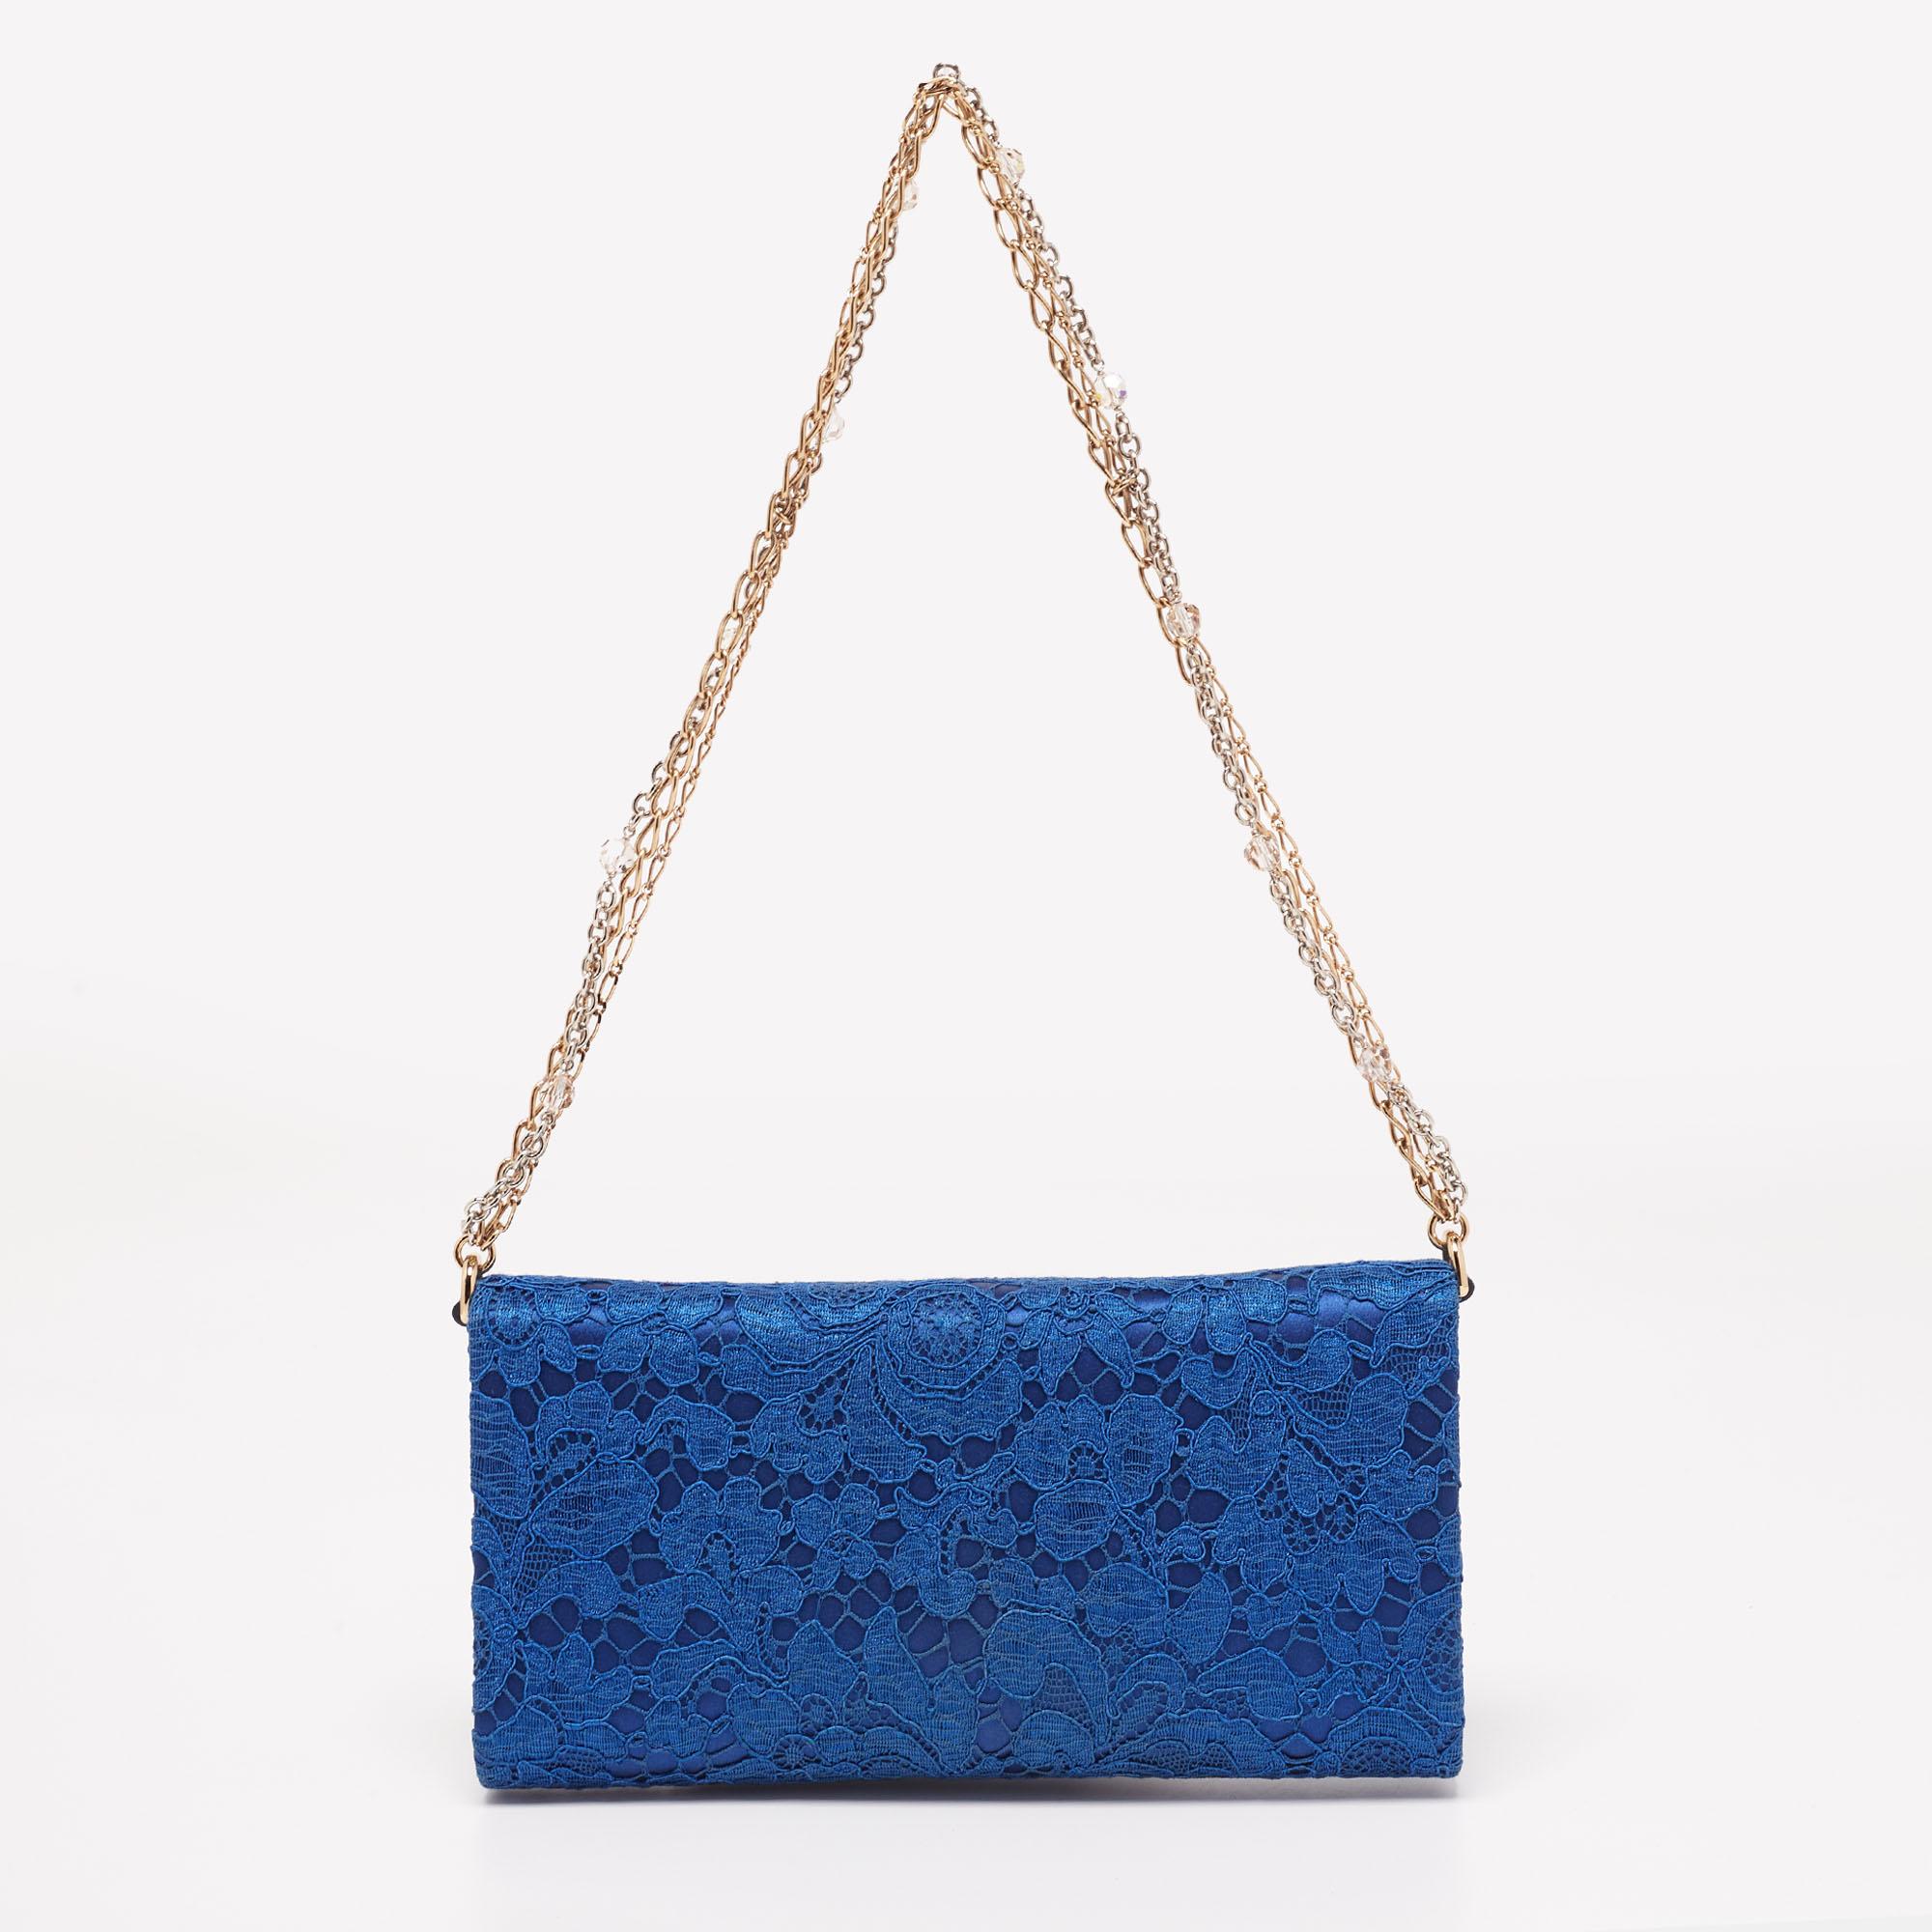 Dolce & Gabbana is known for its outstanding designs, just like this stunning royal blue clutch. A fresh take on elegance, this chain clutch is crafted from lace and satin and flaunts a pretty padlock on the front. It is perfect to complete your